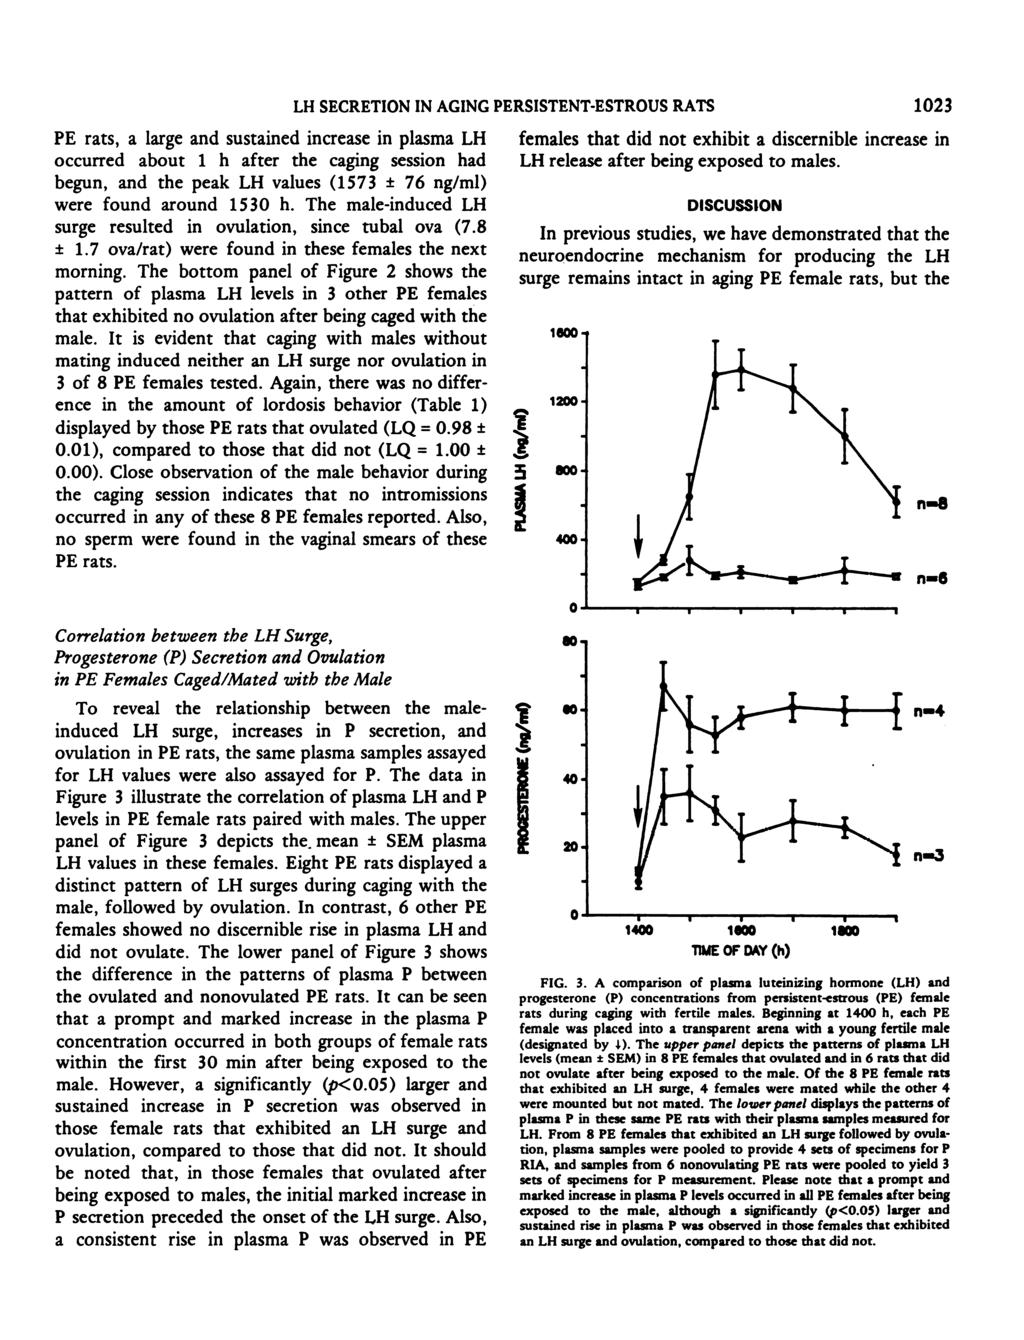 LII SECRETION IN AGING PERSISTENT-ESTROUS RATS 1023 PE rats, a large and sustained increase in plasma LH occurred about 1 h after the caging session had begun, and the peak LH values (1573 ± 76